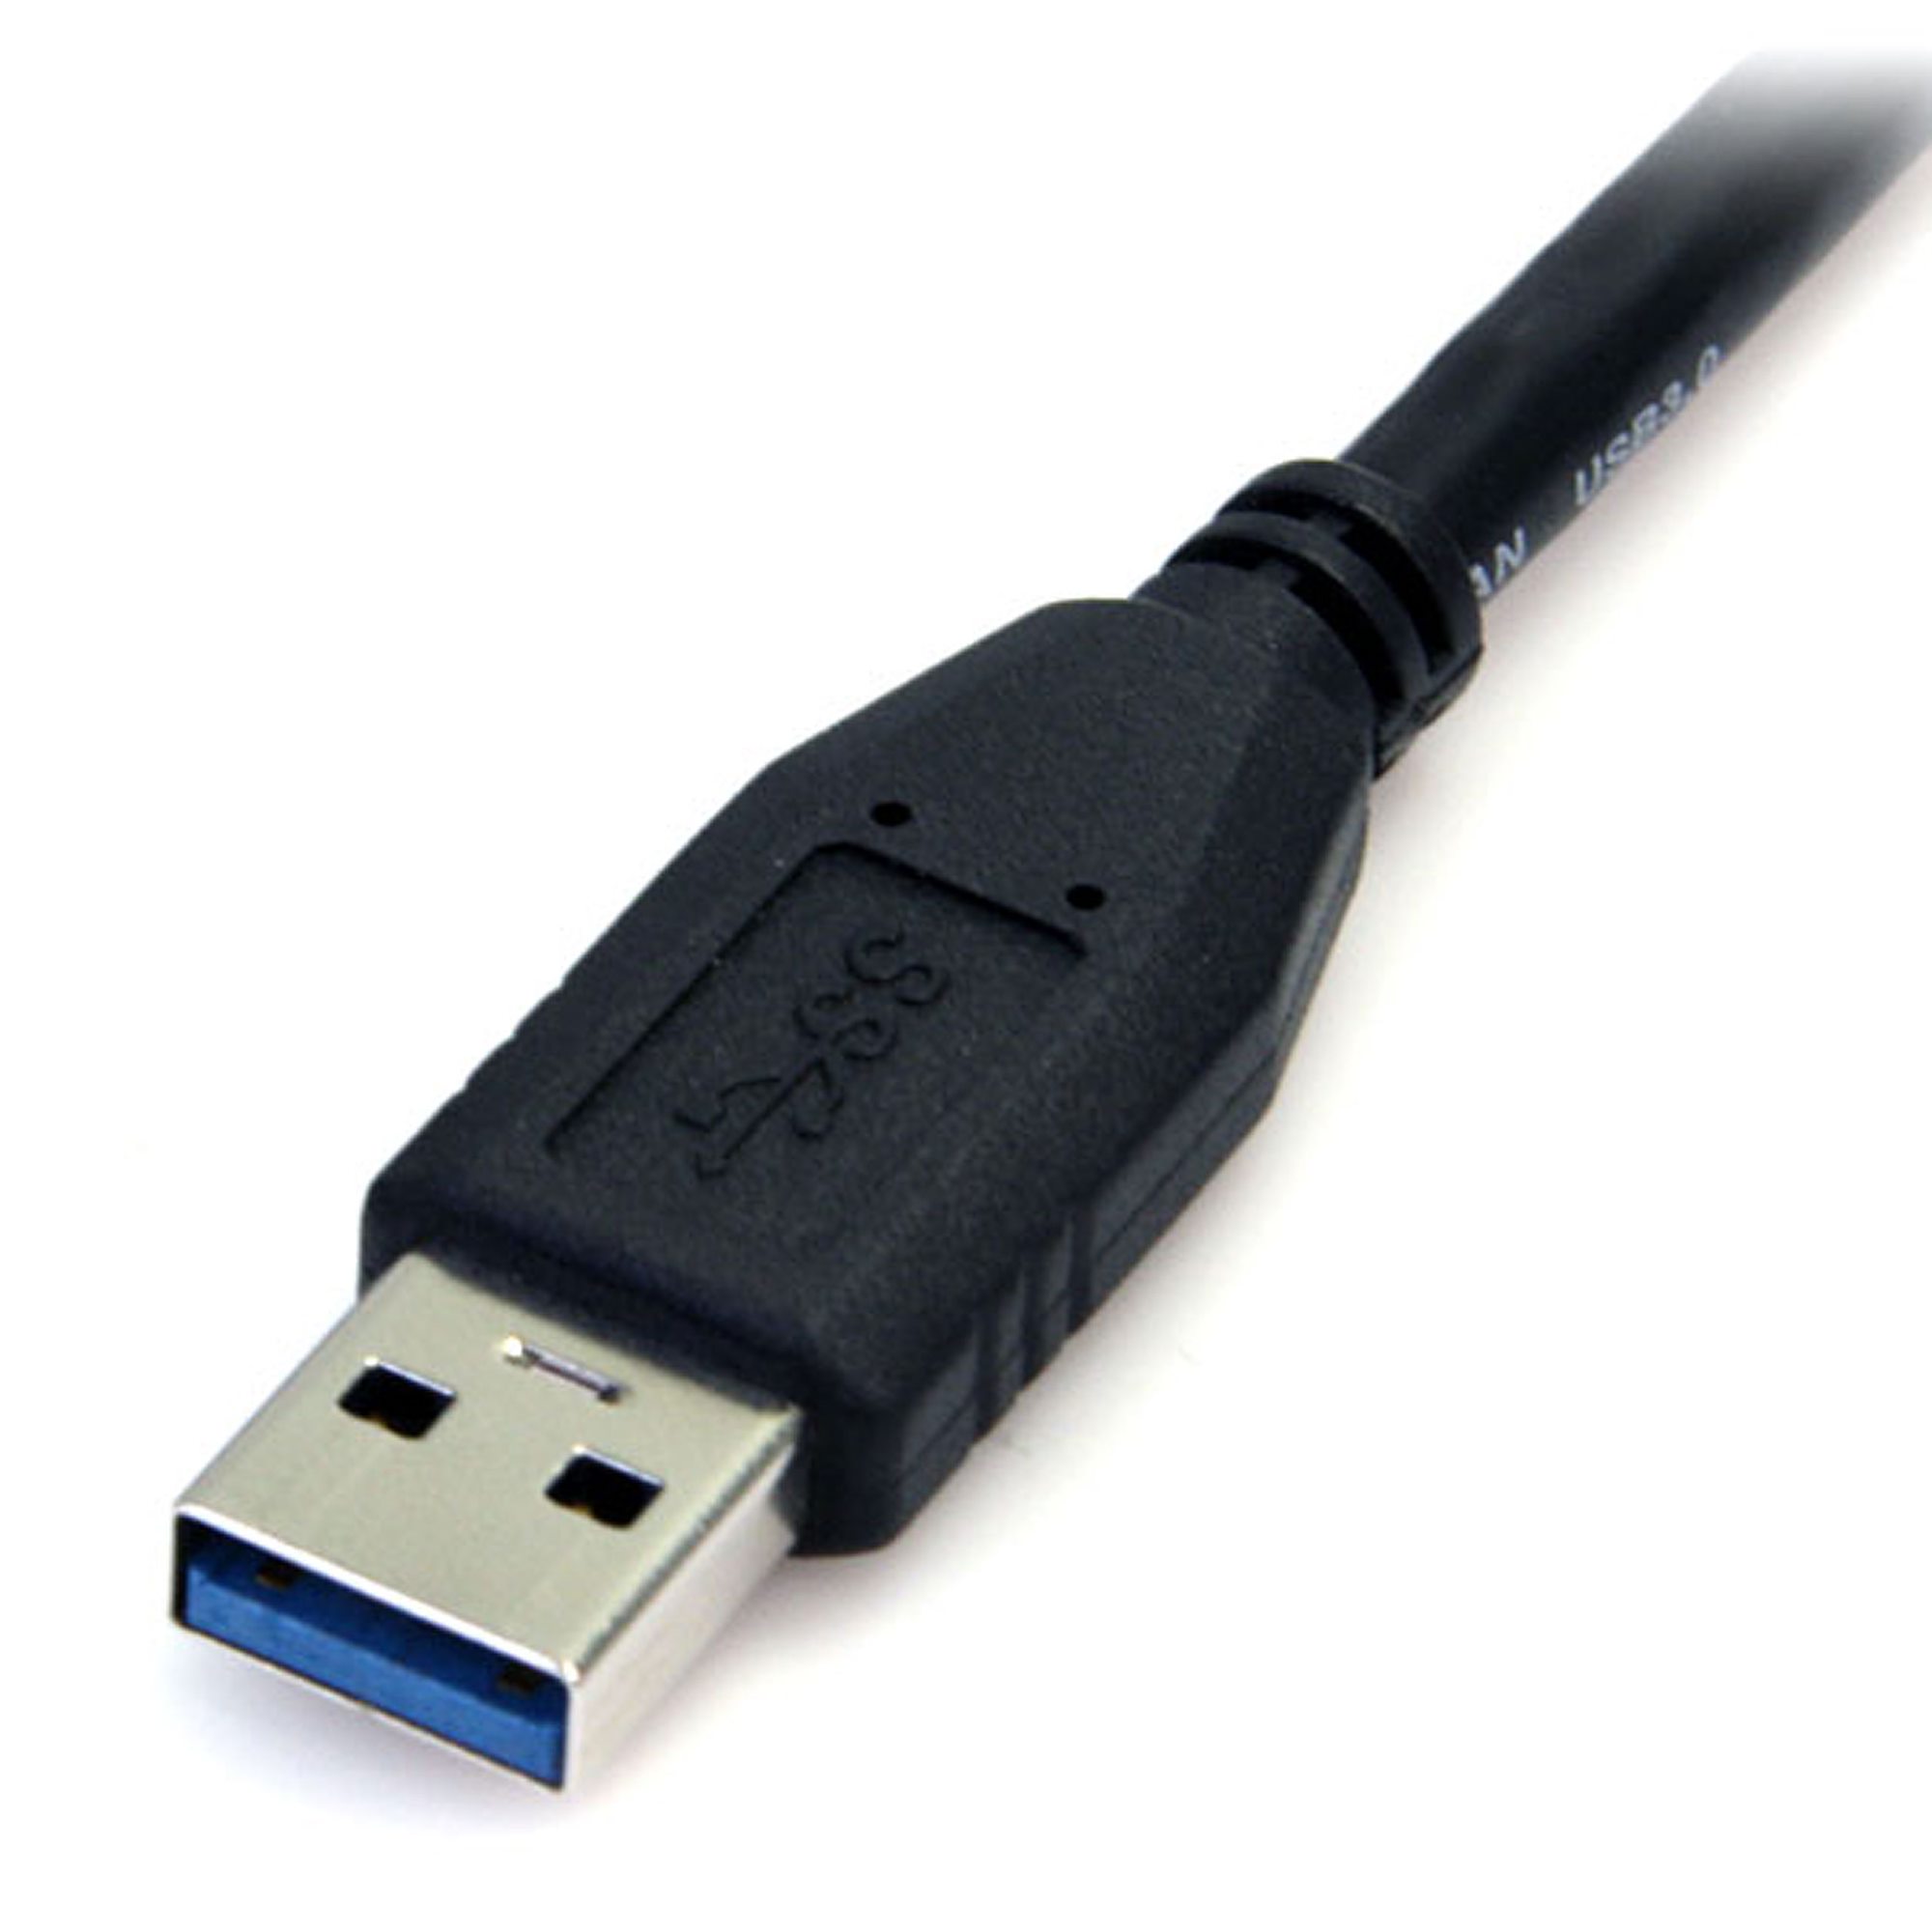 USB C 3.0 CABLE, 5 FTCB4054BK